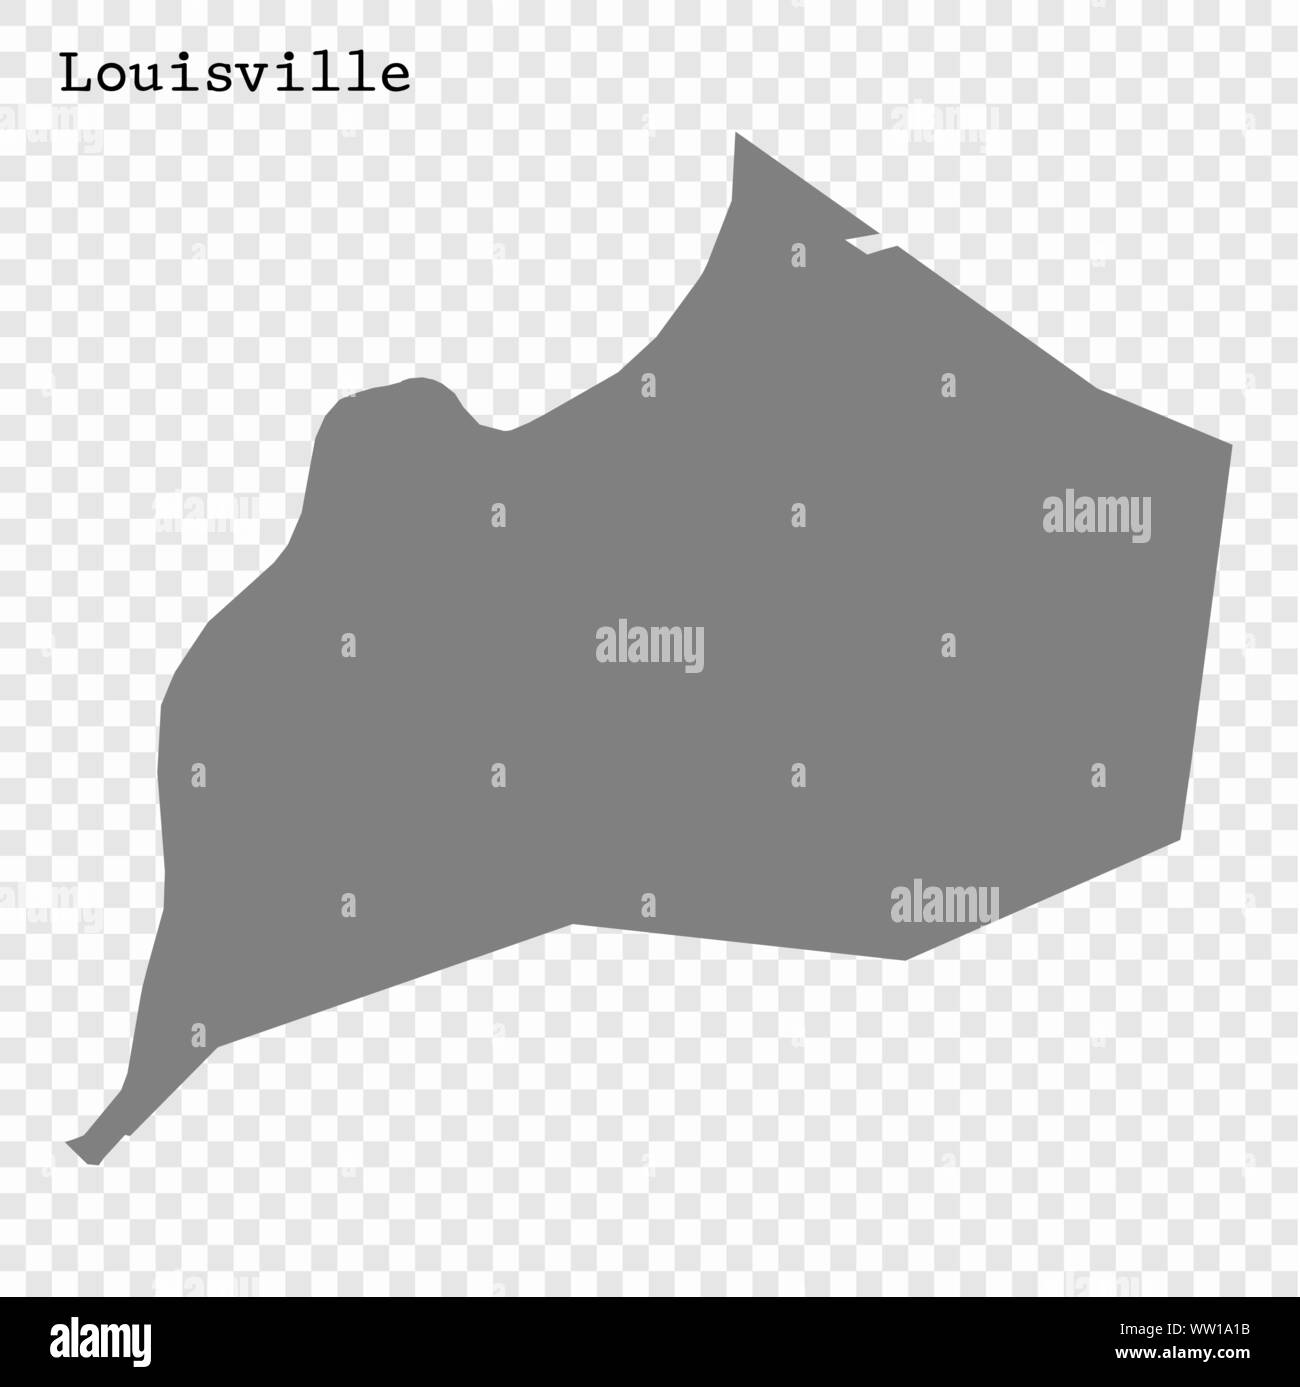 Vector illustration of the Louisville City Limits green road sign Stock  Vector Image & Art - Alamy